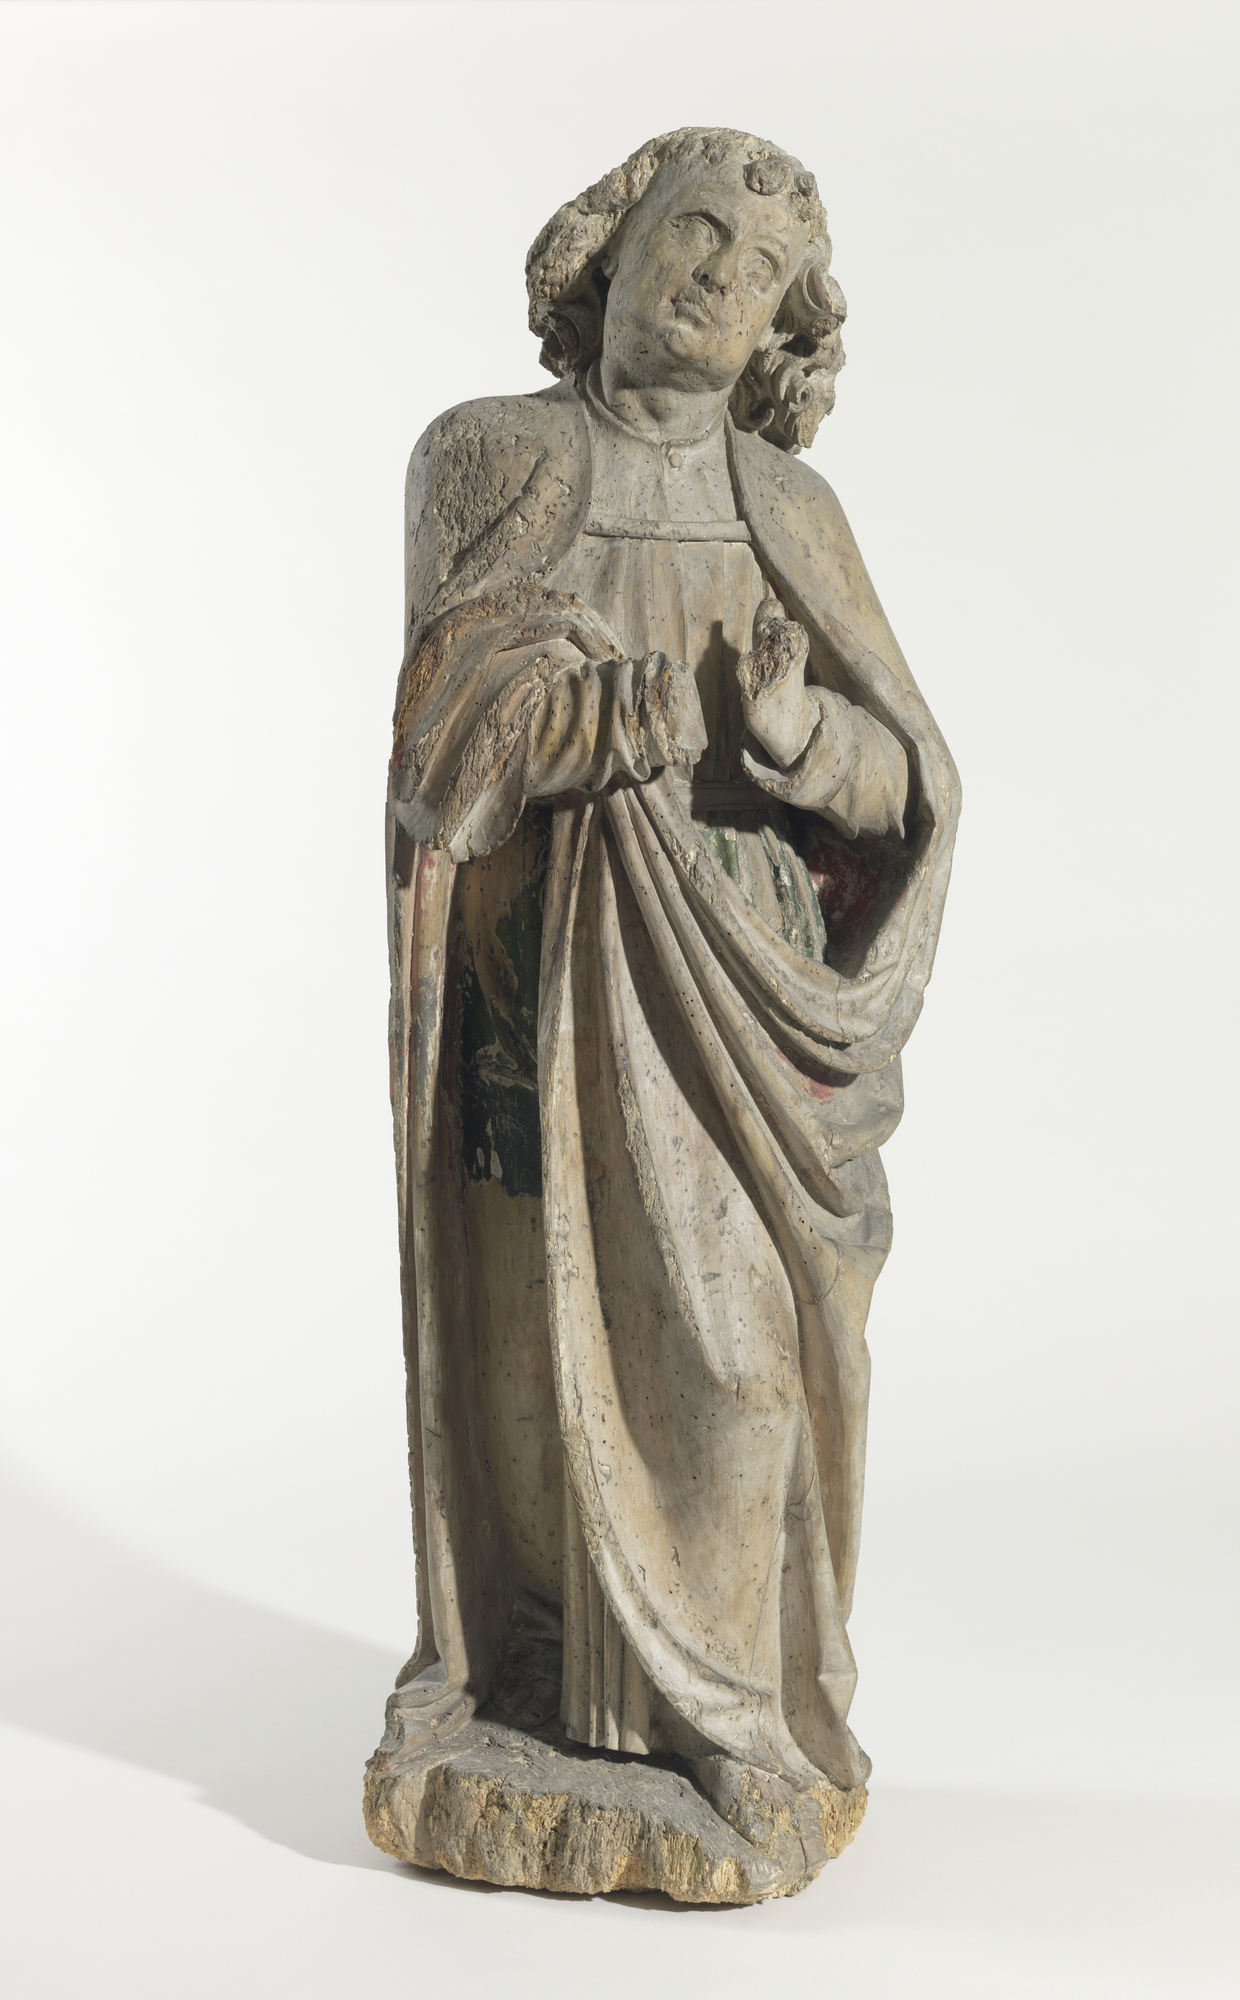 Carved wooden sculpture of a Saint in robes looking up in a motion of prayer.